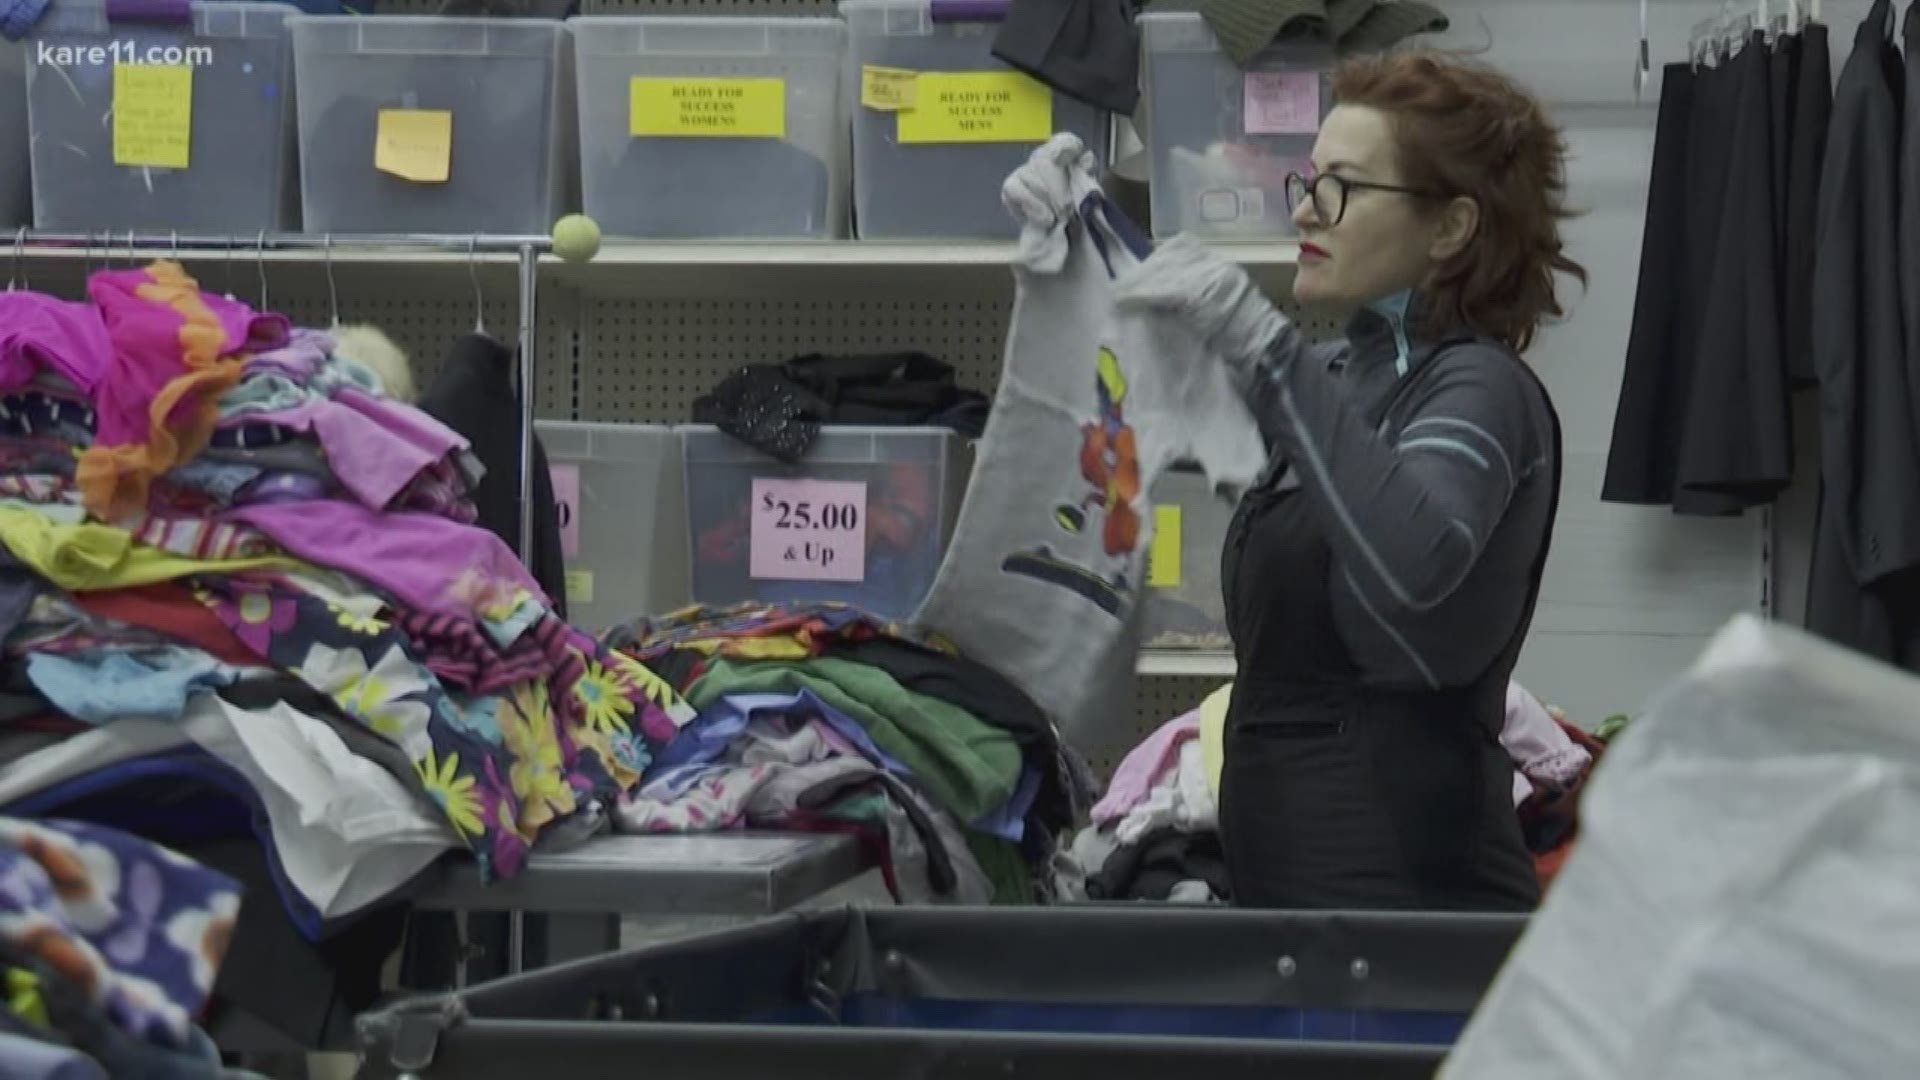 New Netflix series inspires people to donate clothing to thrift shops and consignment stores in normally slow month